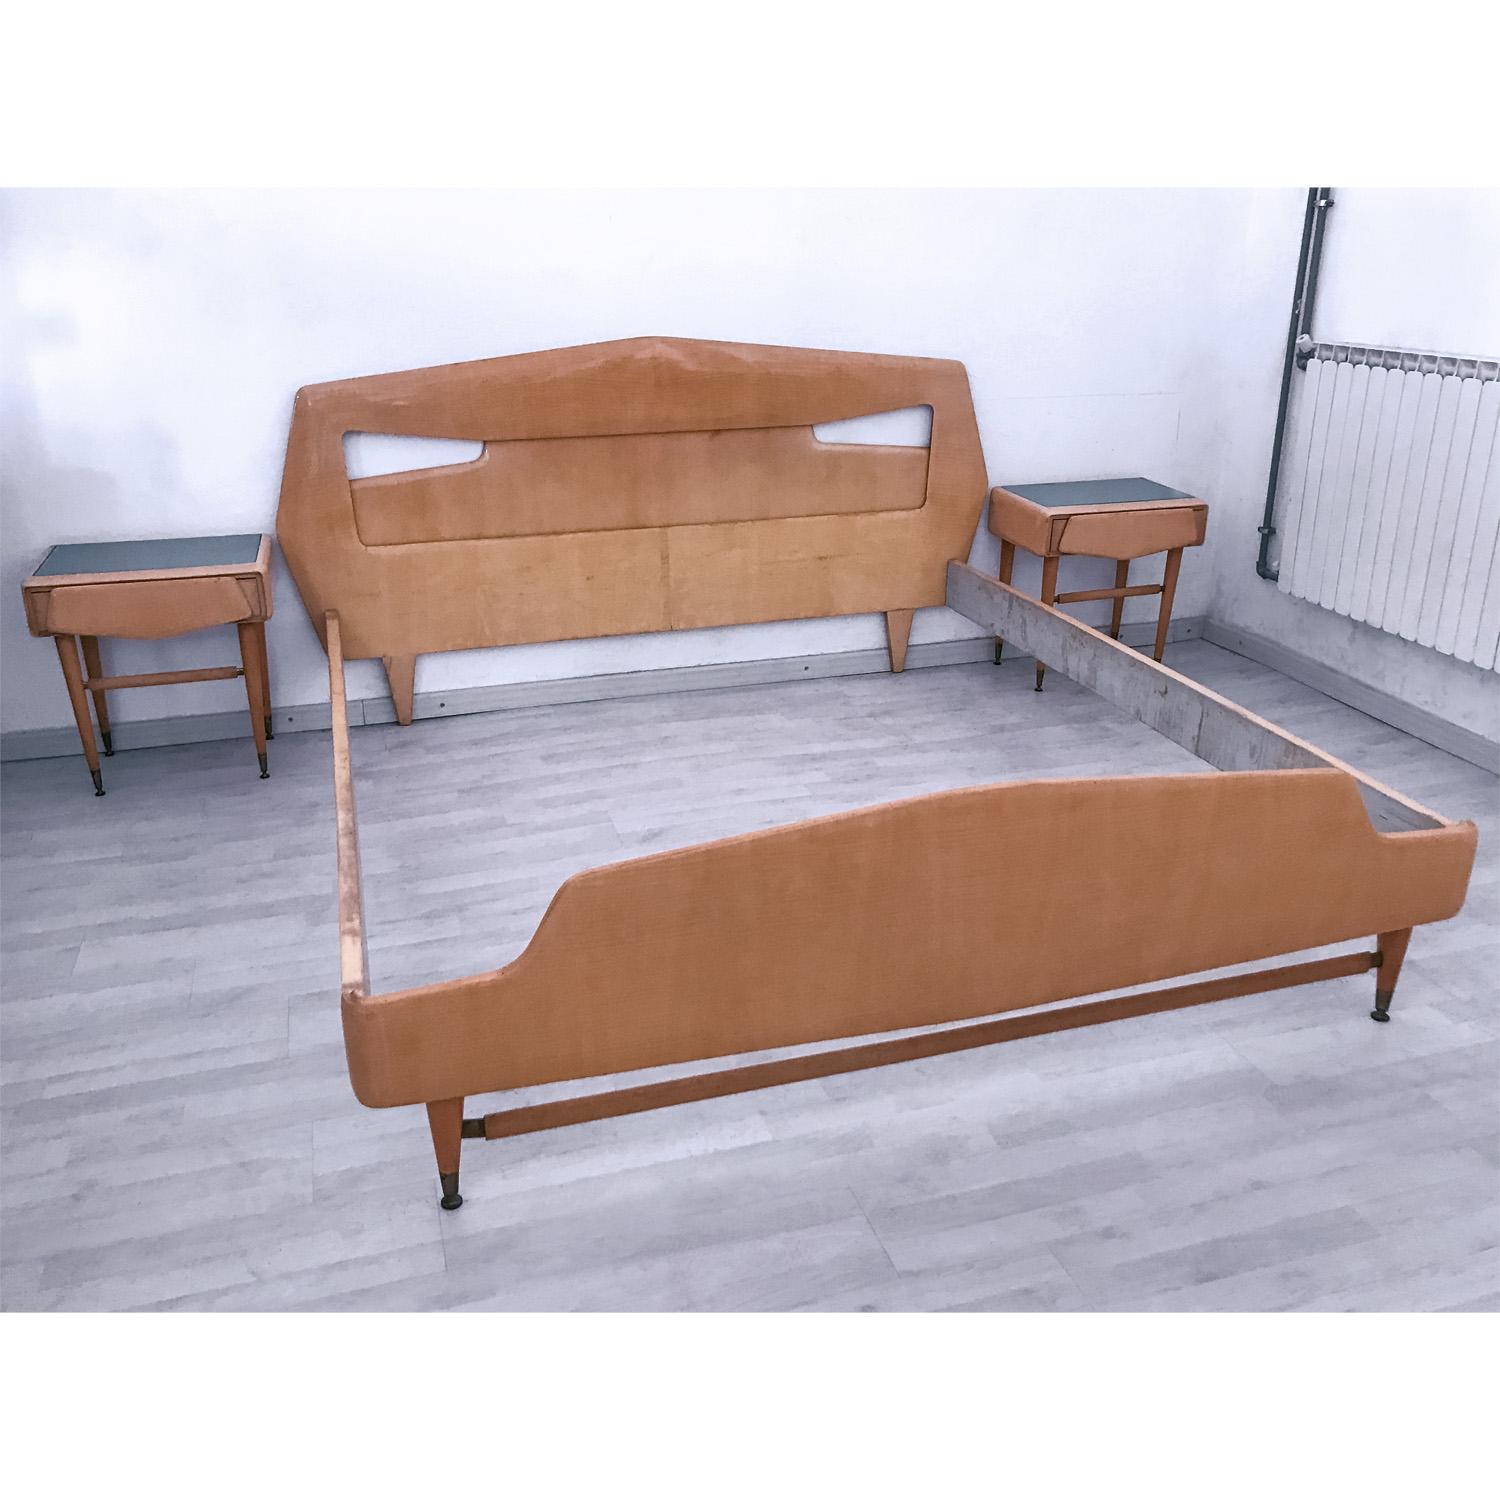 For your consideration an elegant double bed frame accompanied by its two bedside tables, all characterized by a catchy sculptural design attributable to Silvio Cavatorta in 1950s.

All the structures are made of a gorgeous bleached maple wood.
The